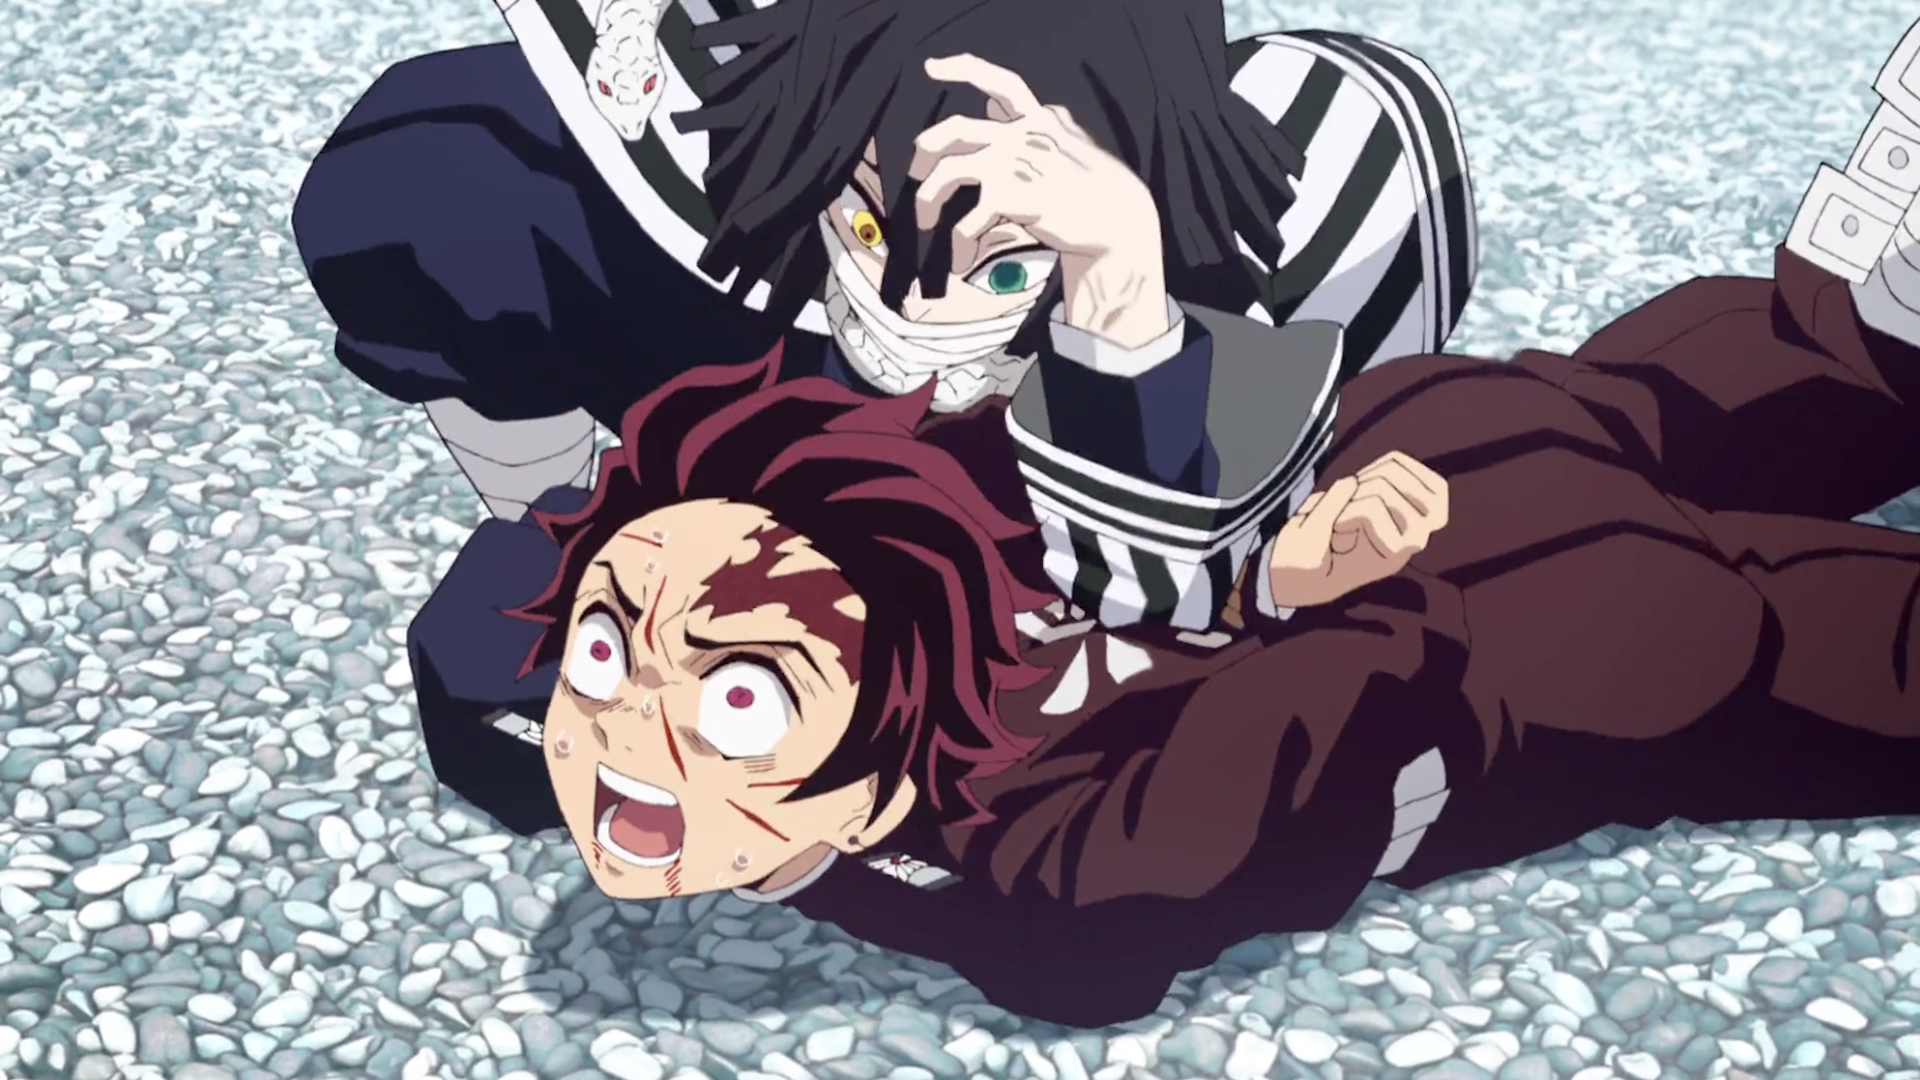 I am reading the manga online, and came across this. There is no way that  this is actually real : r/KimetsuNoYaiba